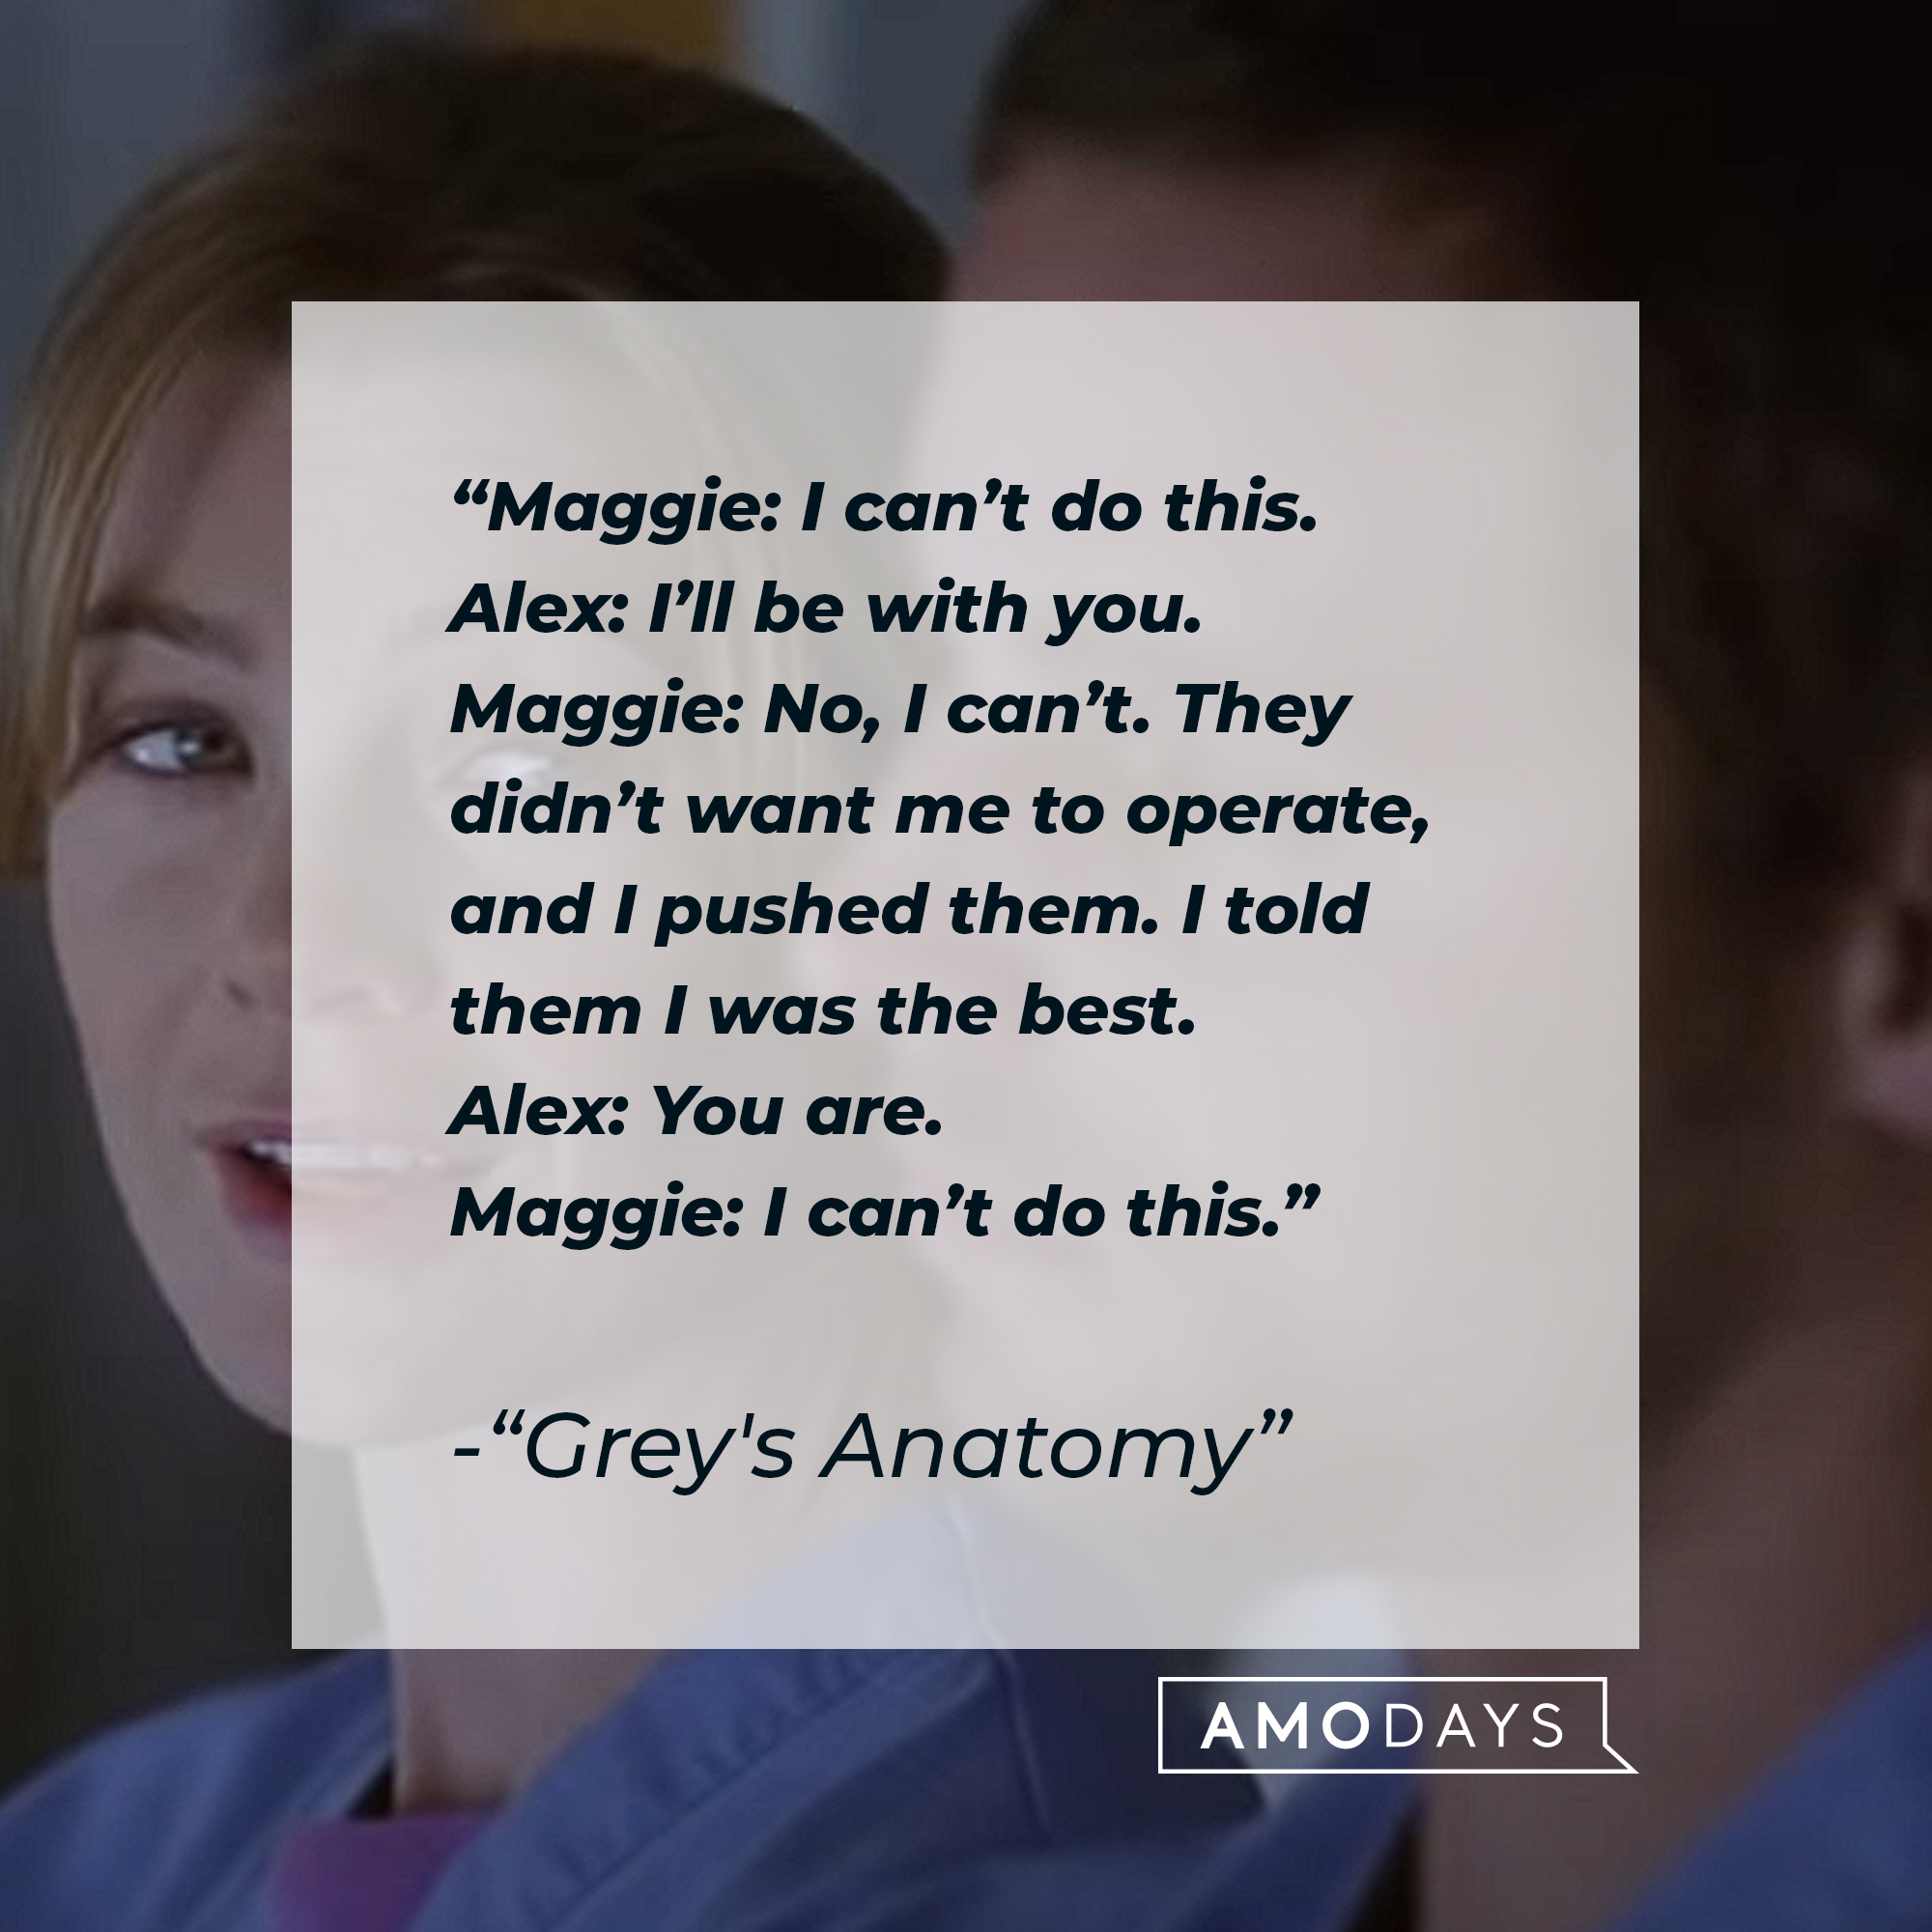 Quote from “Grey’s Anatomy”: “Maggie: I can’t do this. Alex: I’ll be with you. Maggie: No, I can’t. They didn’t want me to operate, and I pushed them. I told them I was the best. Alex: You are. Maggie: I can’t do this.” | Source: youtube.com/ABCNetwork